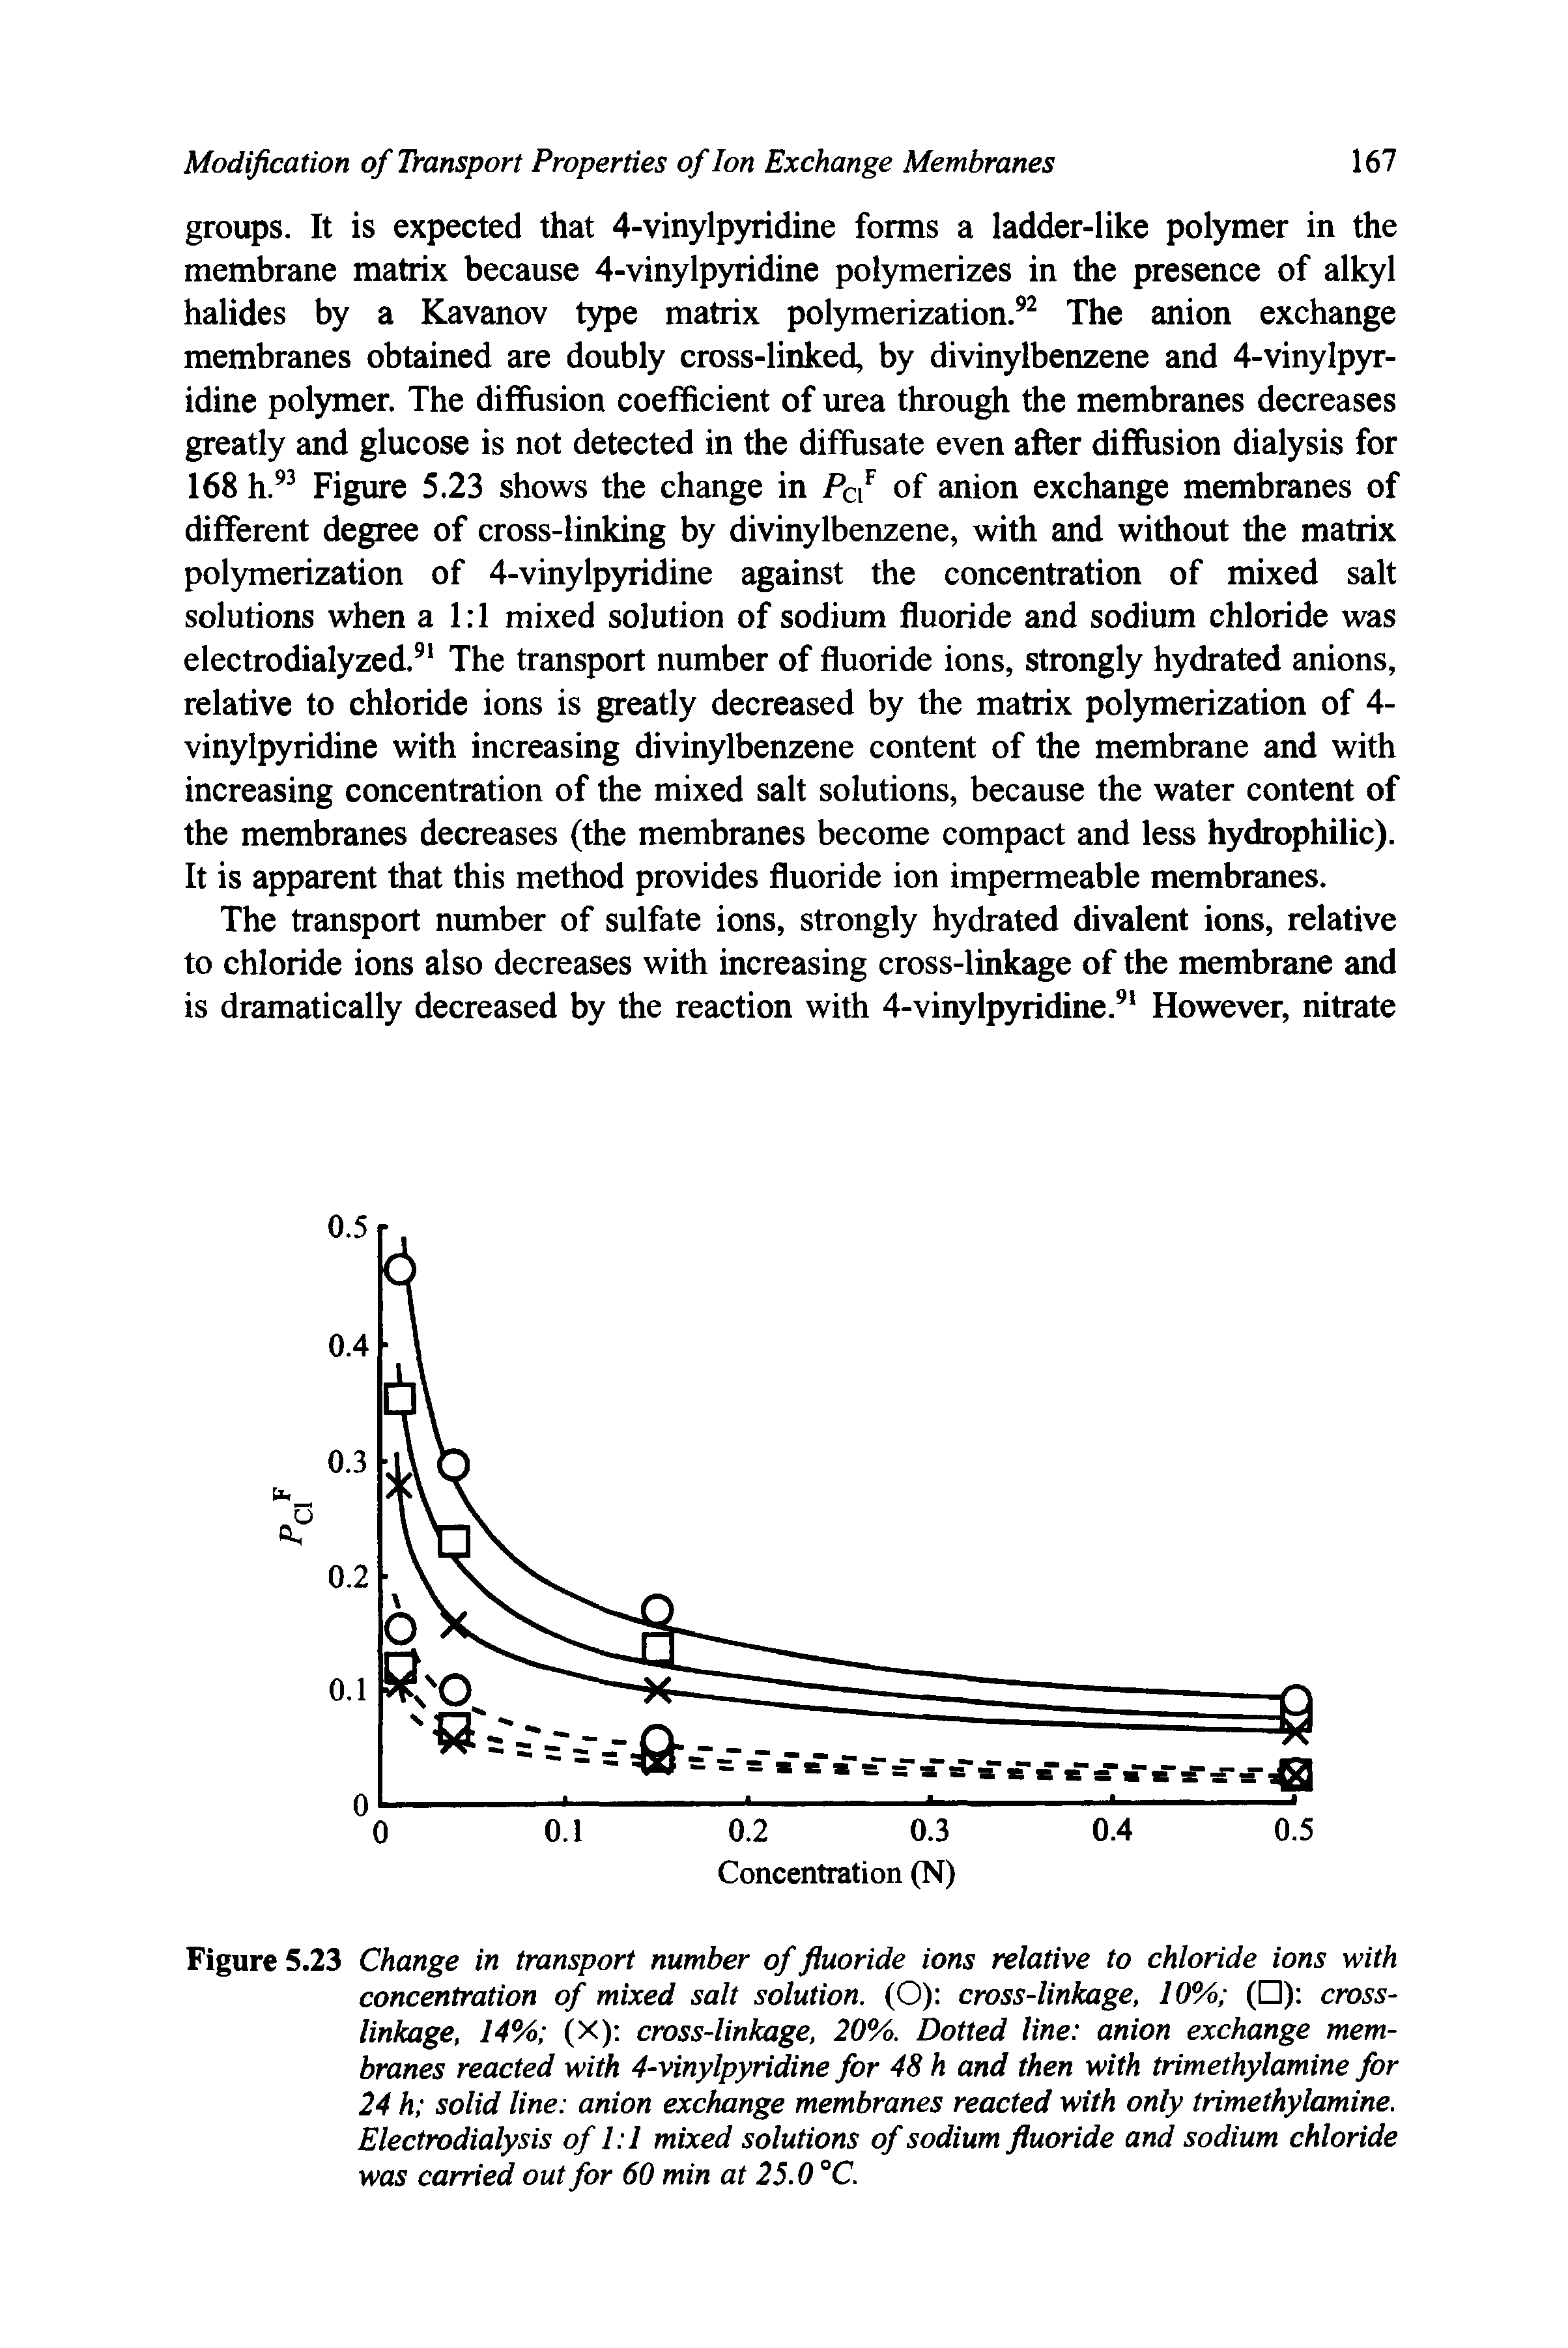 Figure 5.23 Change in transport number of fluoride ions relative to chloride ions with concentration of mixed salt solution. (O) cross-linkage, 10% ( ) cross-linkage, 14% (X) cross-linkage, 20%. Dotted line anion exchange membranes reacted with 4-vinylpyridine for 48 h and then with trimethylamine for 24 h solid line anion exchange membranes reacted with only trimethylamine. Electrodialysis of 1 1 mixed solutions of sodium fluoride and sodium chloride was carried out for 60 min at 25.0 °C.